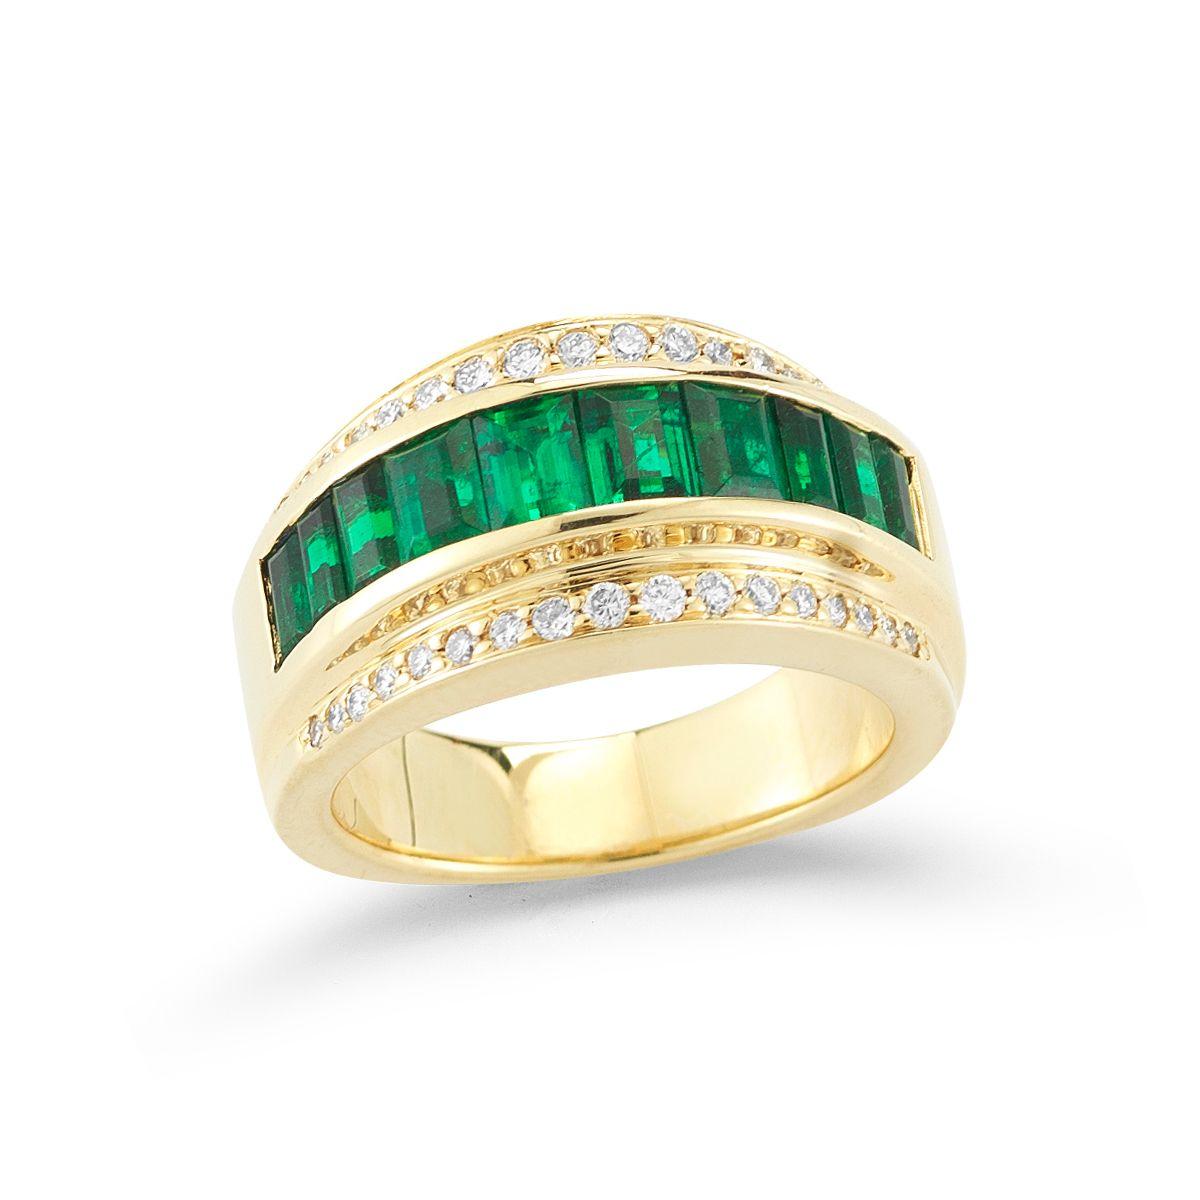 EMERALD AND DIAMOND RING
Perfectly matched emerald baguettes in a rich green upgrade a classic
band.
Item: # 02158
Metal: 18k Y
Color Weight: 1.95 ct.
Diamond Weight: 0.35 ct.